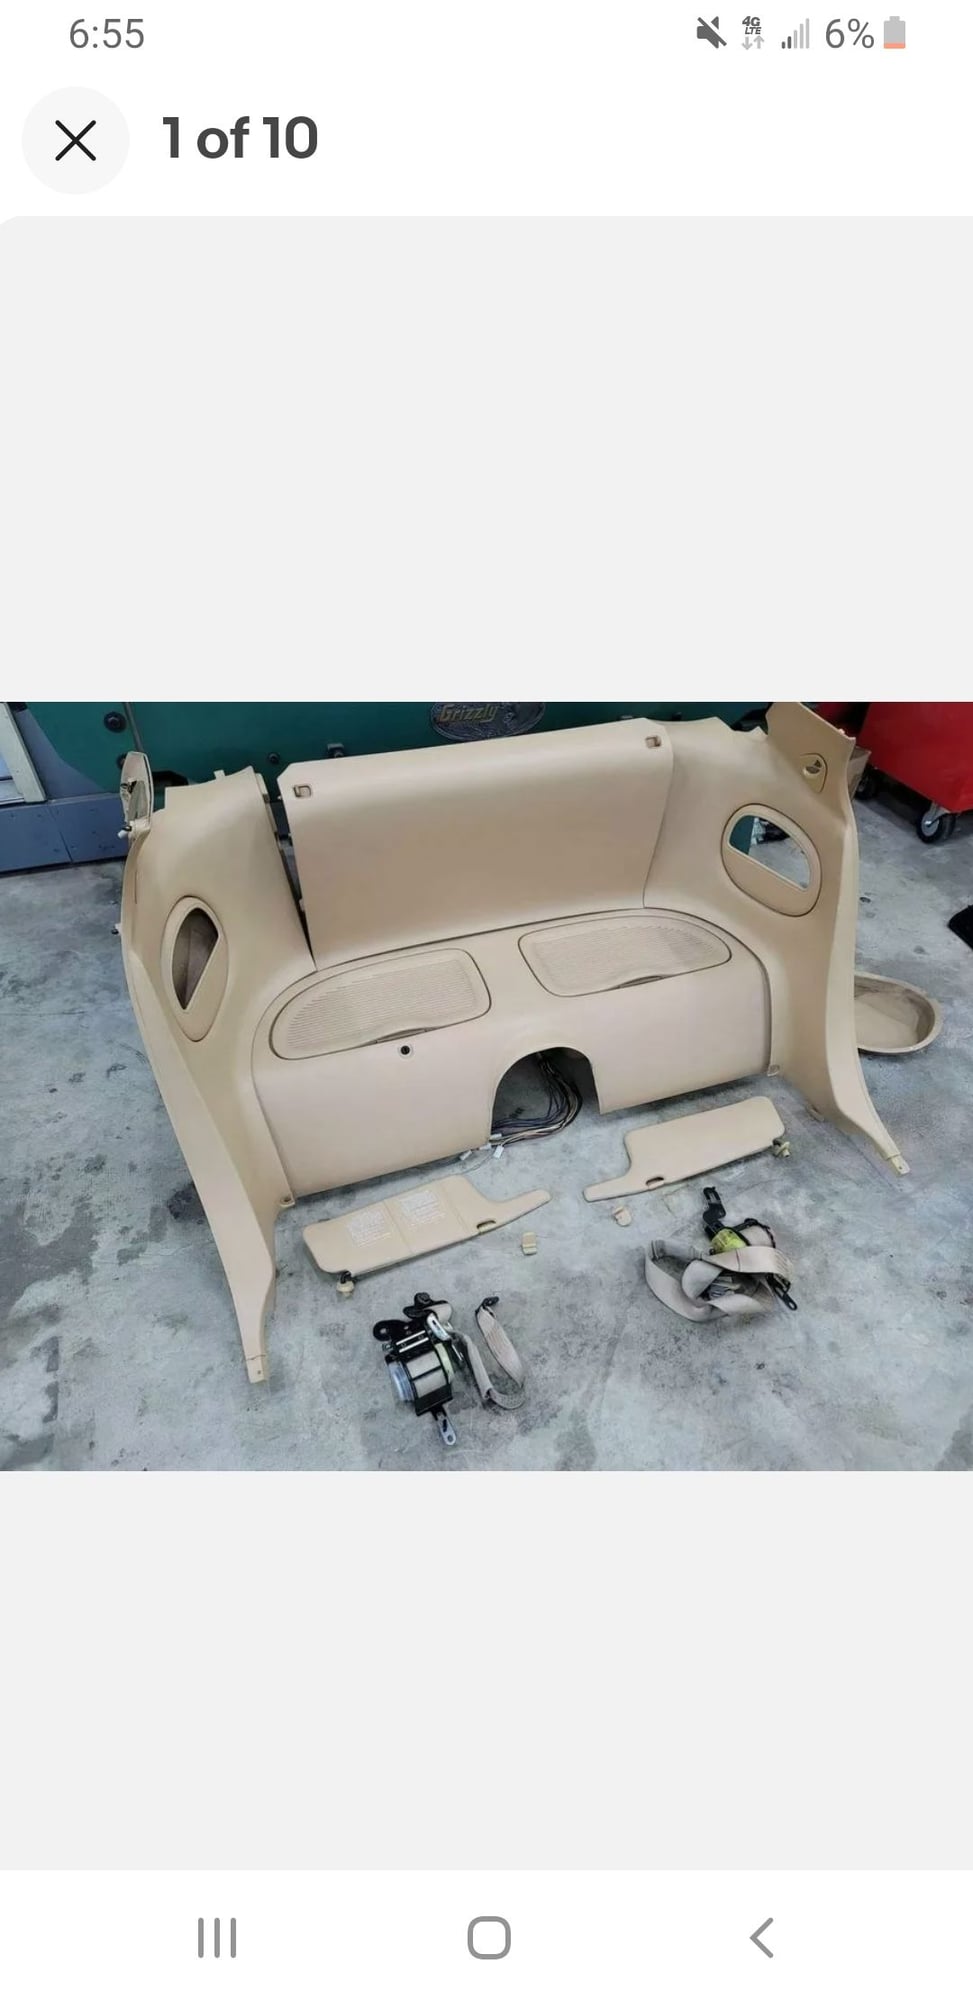 Interior/Upholstery - Looking for FD interior parts. - Used - 1993 to 1999 Mazda RX-7 - Chicago, IL 60083, United States